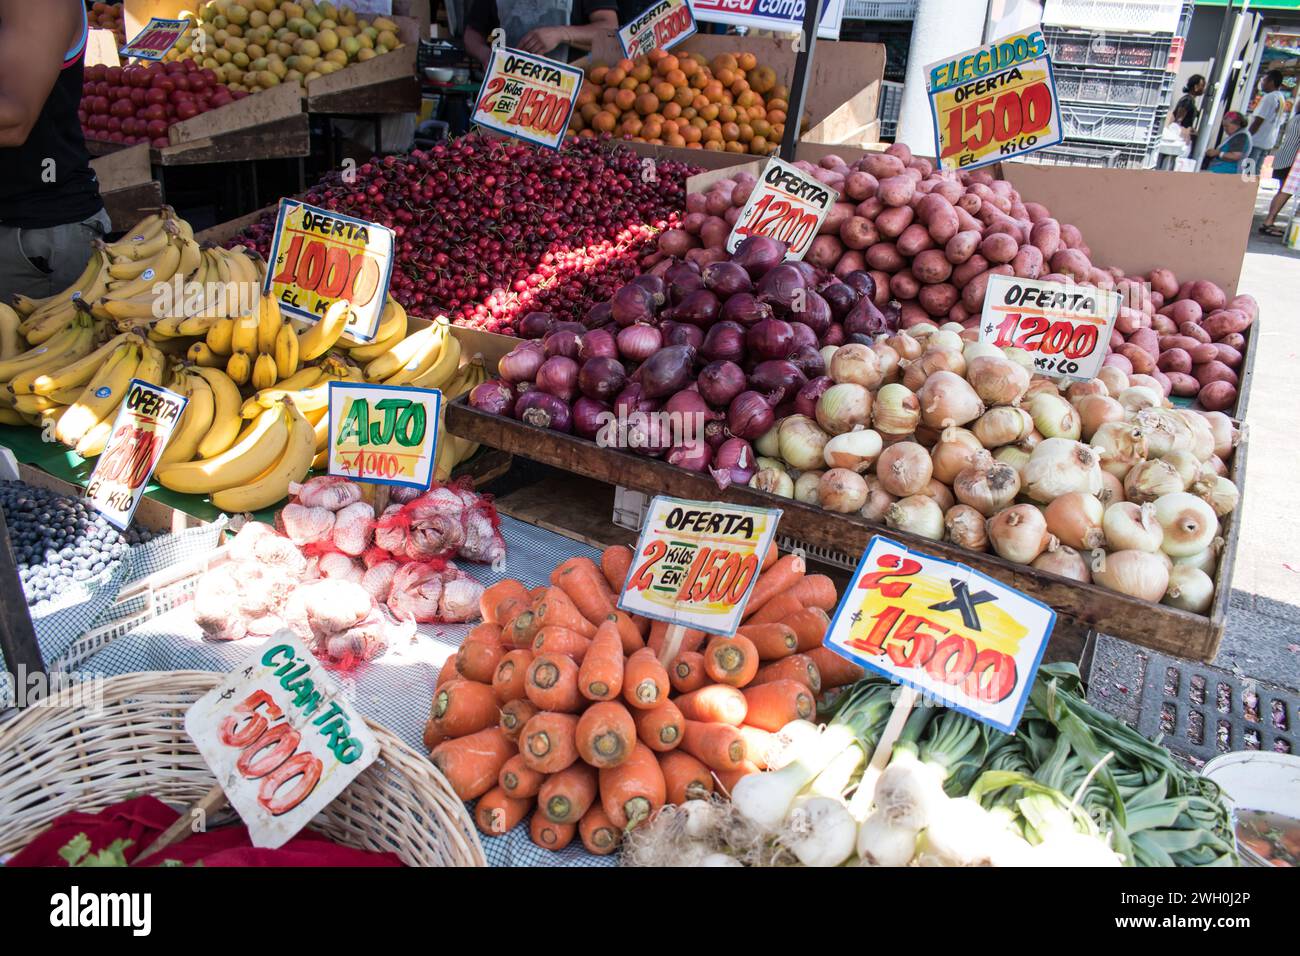 The market stalls surrounding Mercado Central in Chile offer a vibrant array of goods including fresh fruits and vegetables. Stock Photo